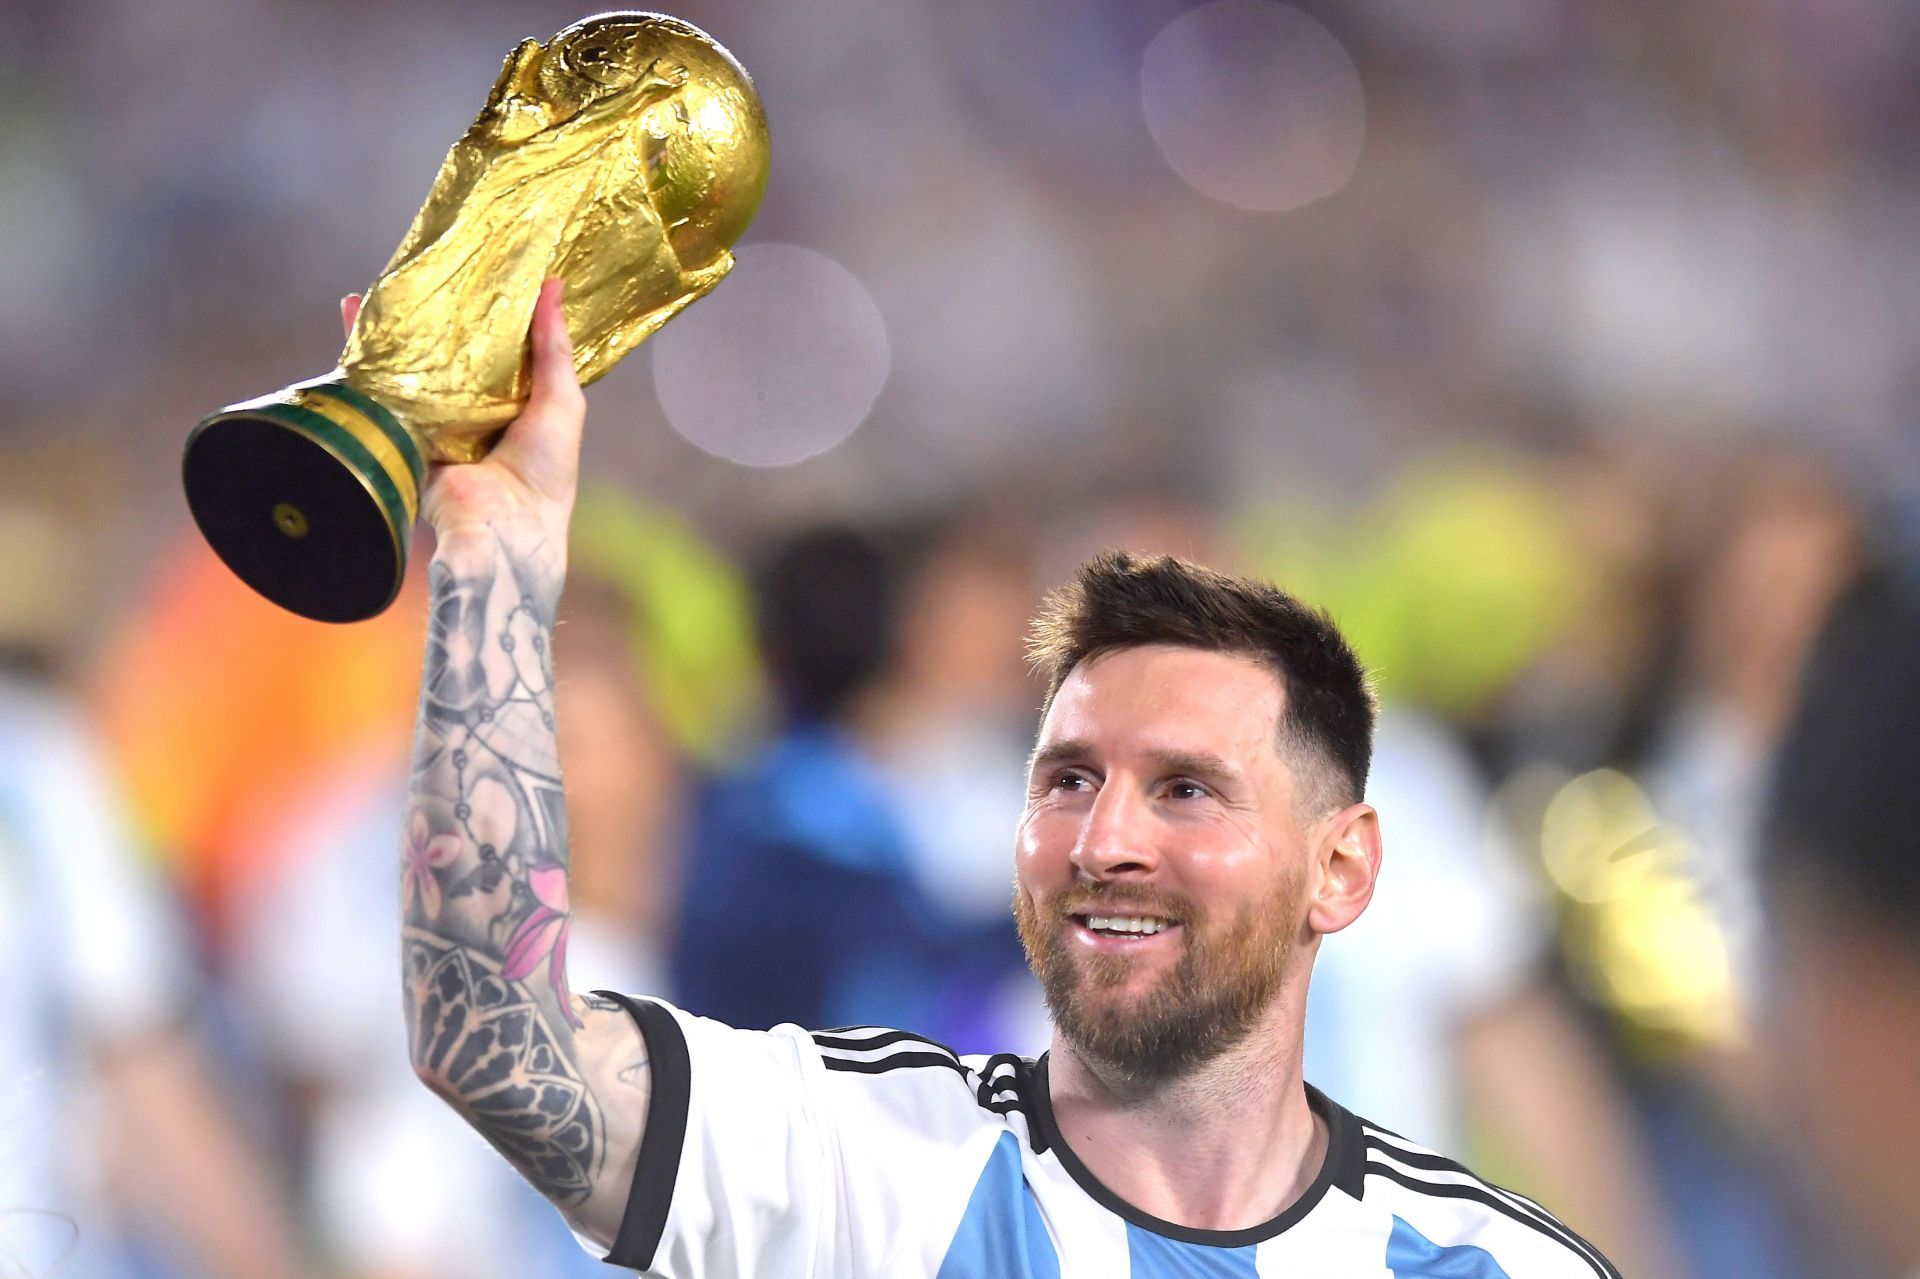 Lionel Messi achieved a long-time dream by winning the 2022 FIFA World Cup.